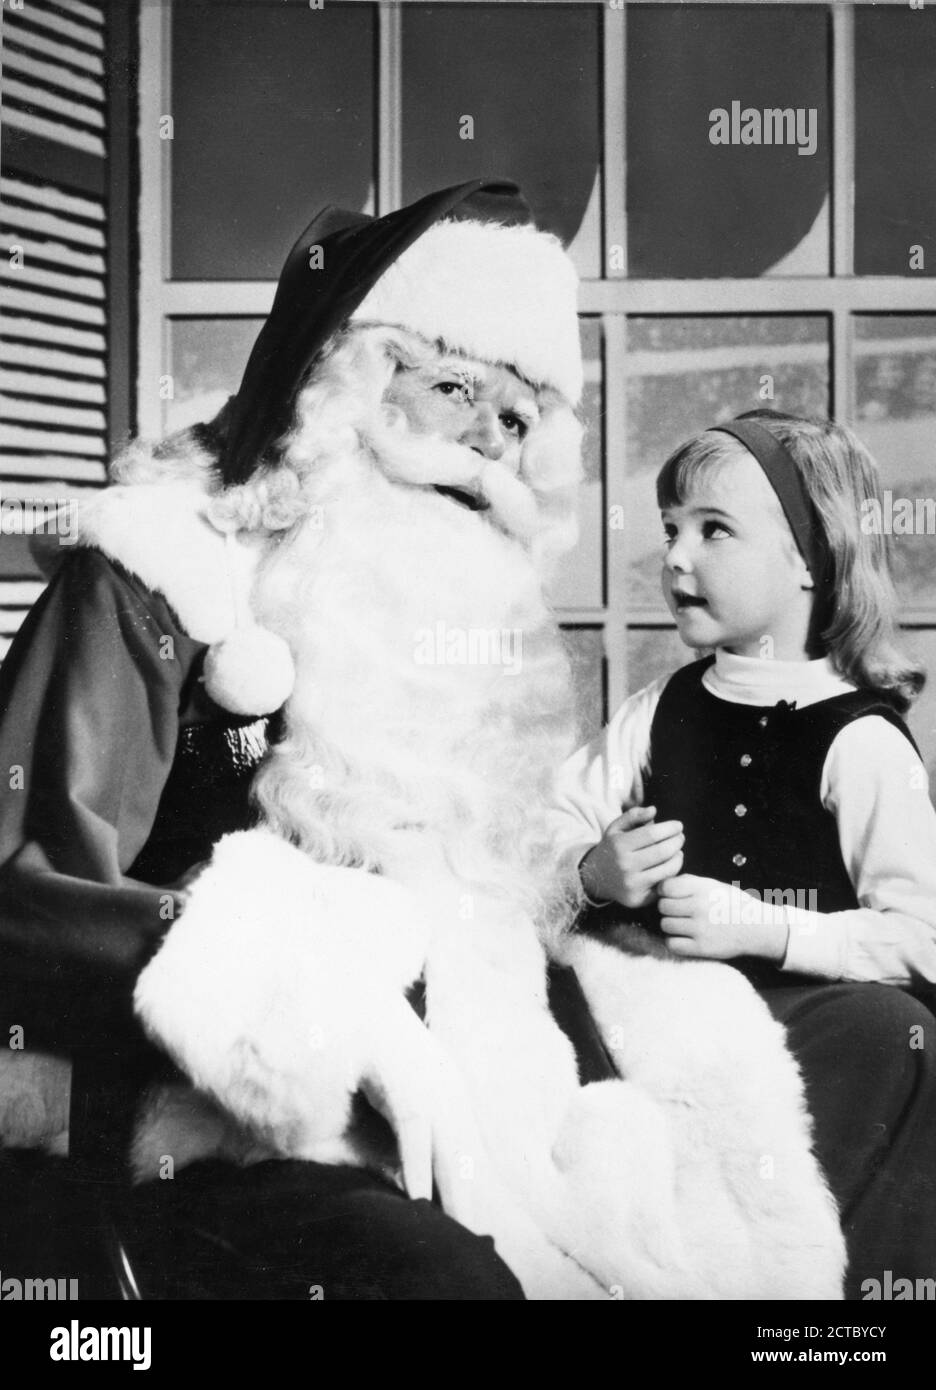 Santa Claus with child in Sears, Roebuck, Washington, DC, 1967. (Photo by Sears, Roebuck/United States Information Agency/RBM Vintage Images) Stock Photo